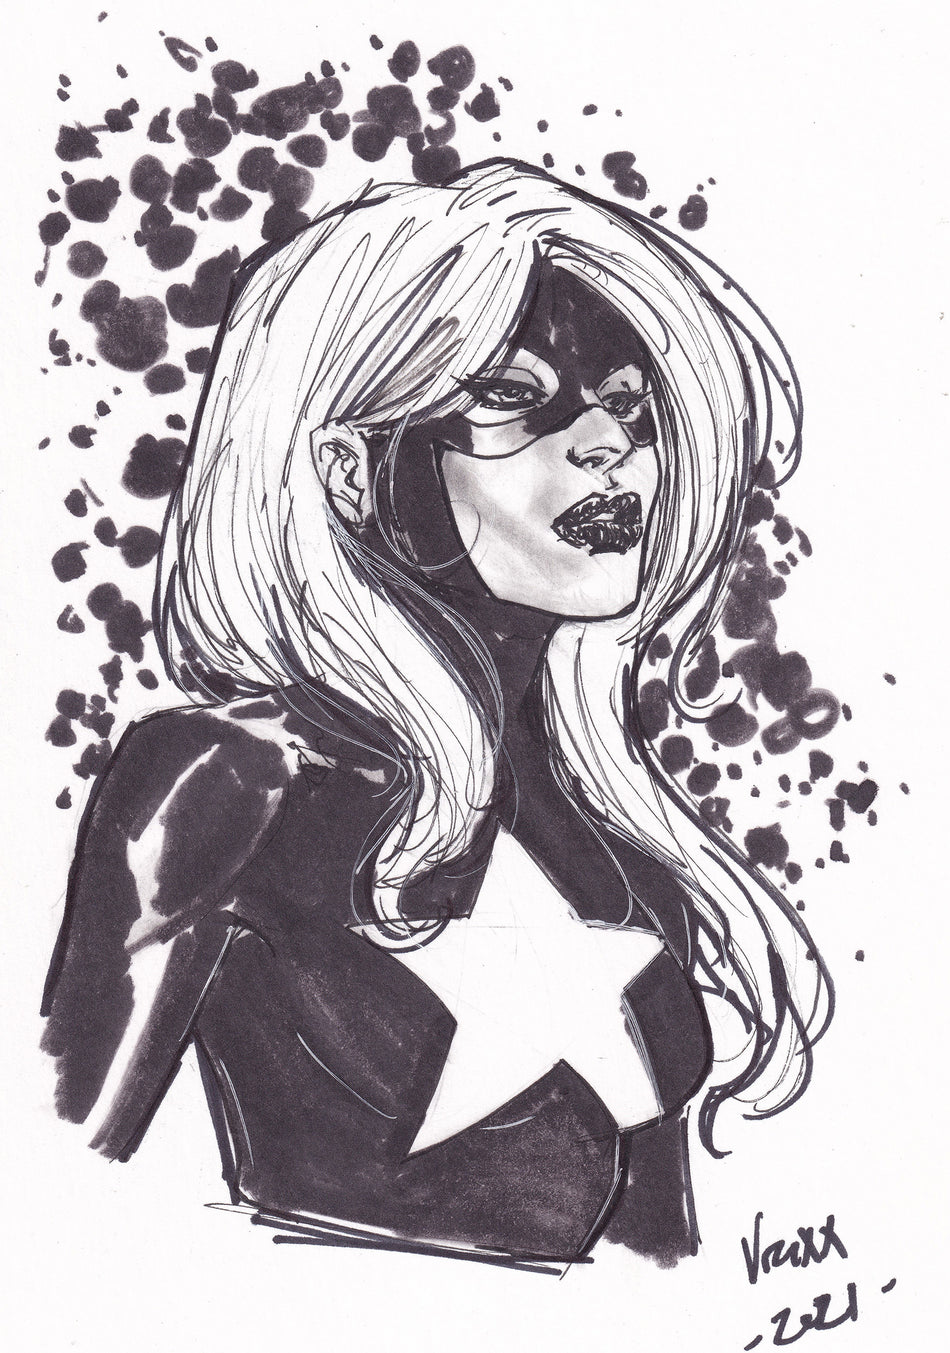 Stargirl - 6" x 9" - Original Art sold by Stronghold Collectibles